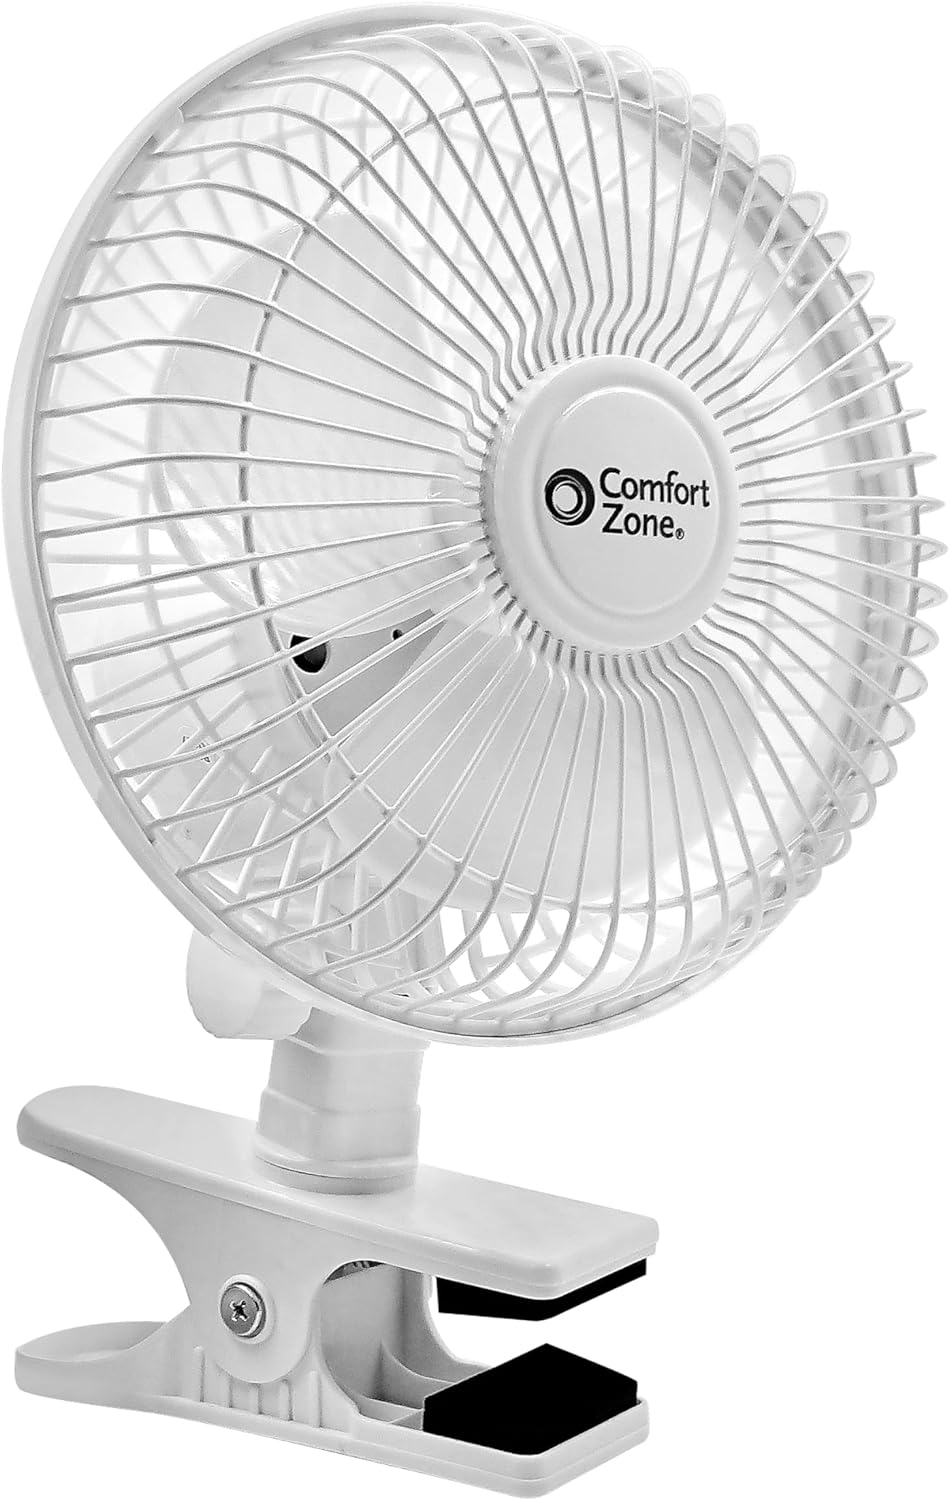 6 Electric Portable, Quiet, Indoor 2-Speed Desk Fan with Clip and Fully Adjustable Tilt, Ideal for Home, Bedroom, Dorm & Office, CZ6C